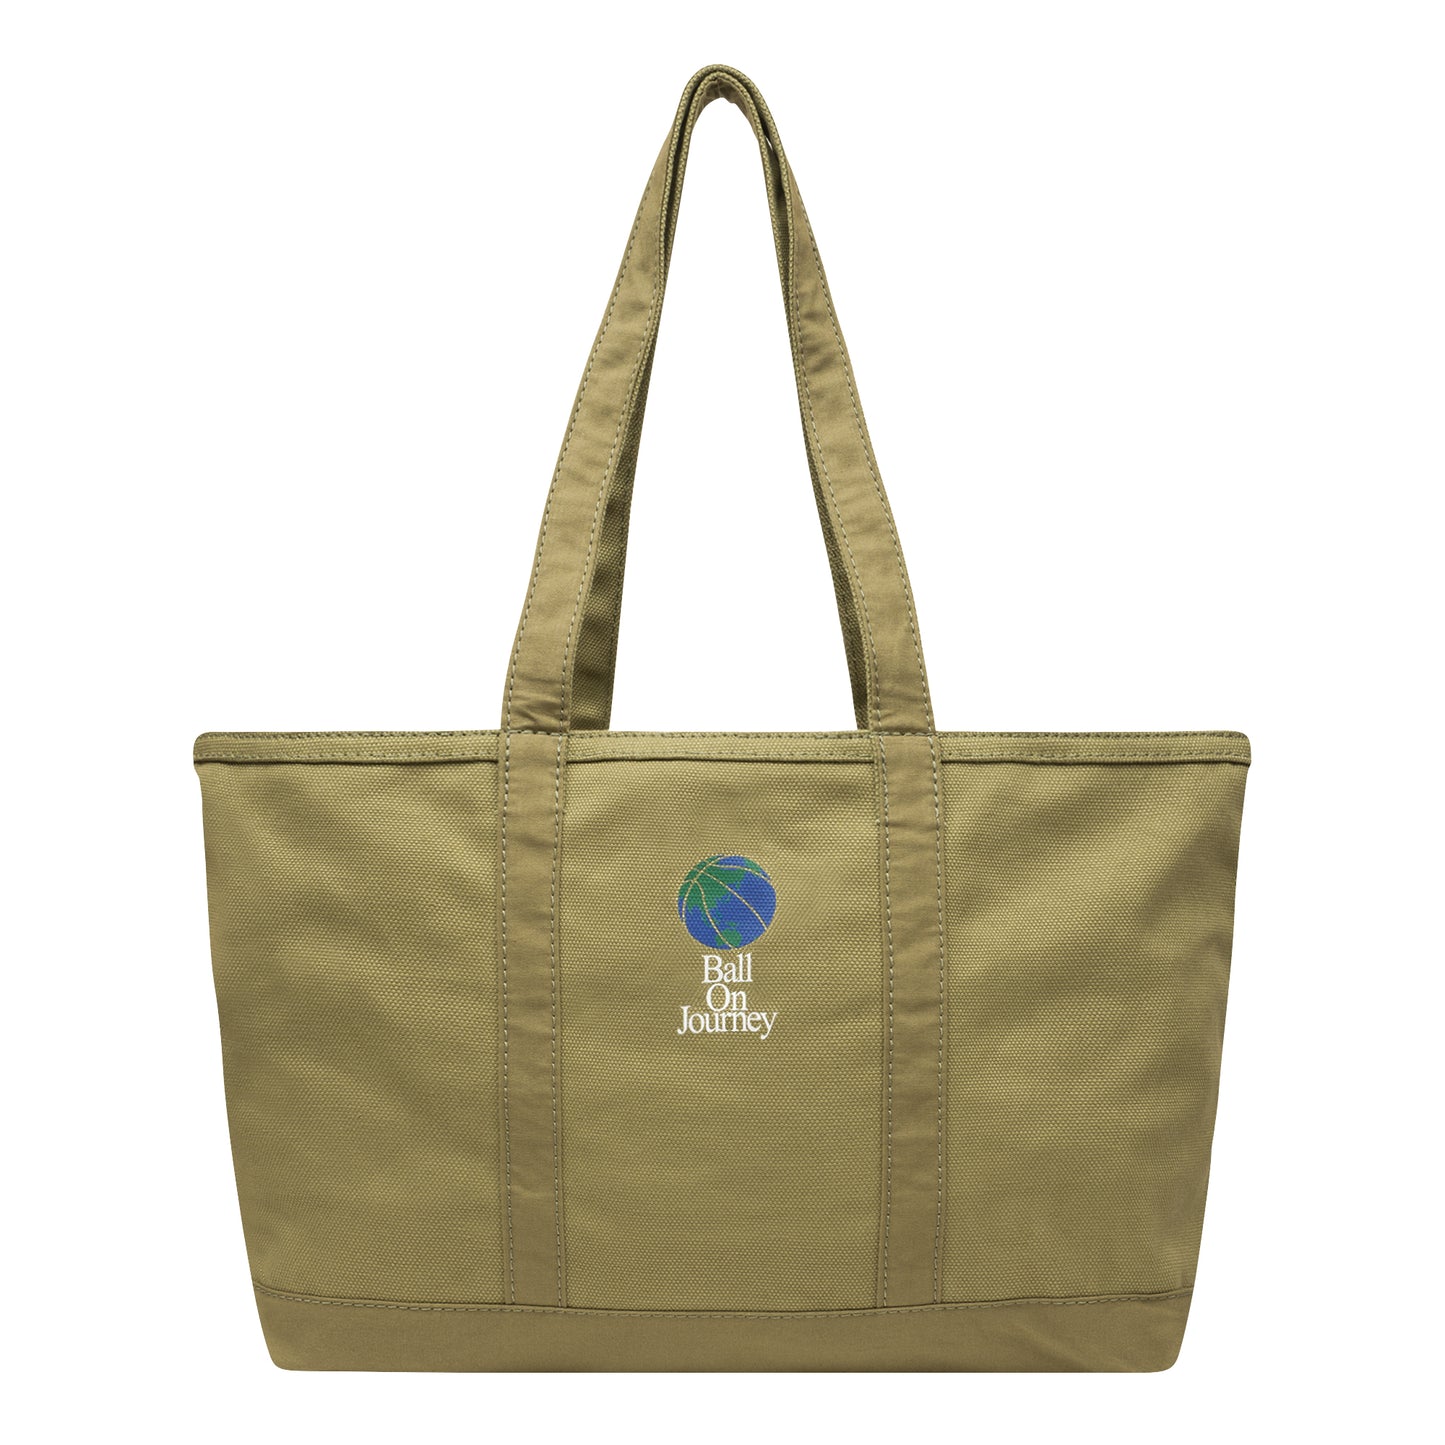 Ball On Journey Logo Canvas Tote Bag (olive) L